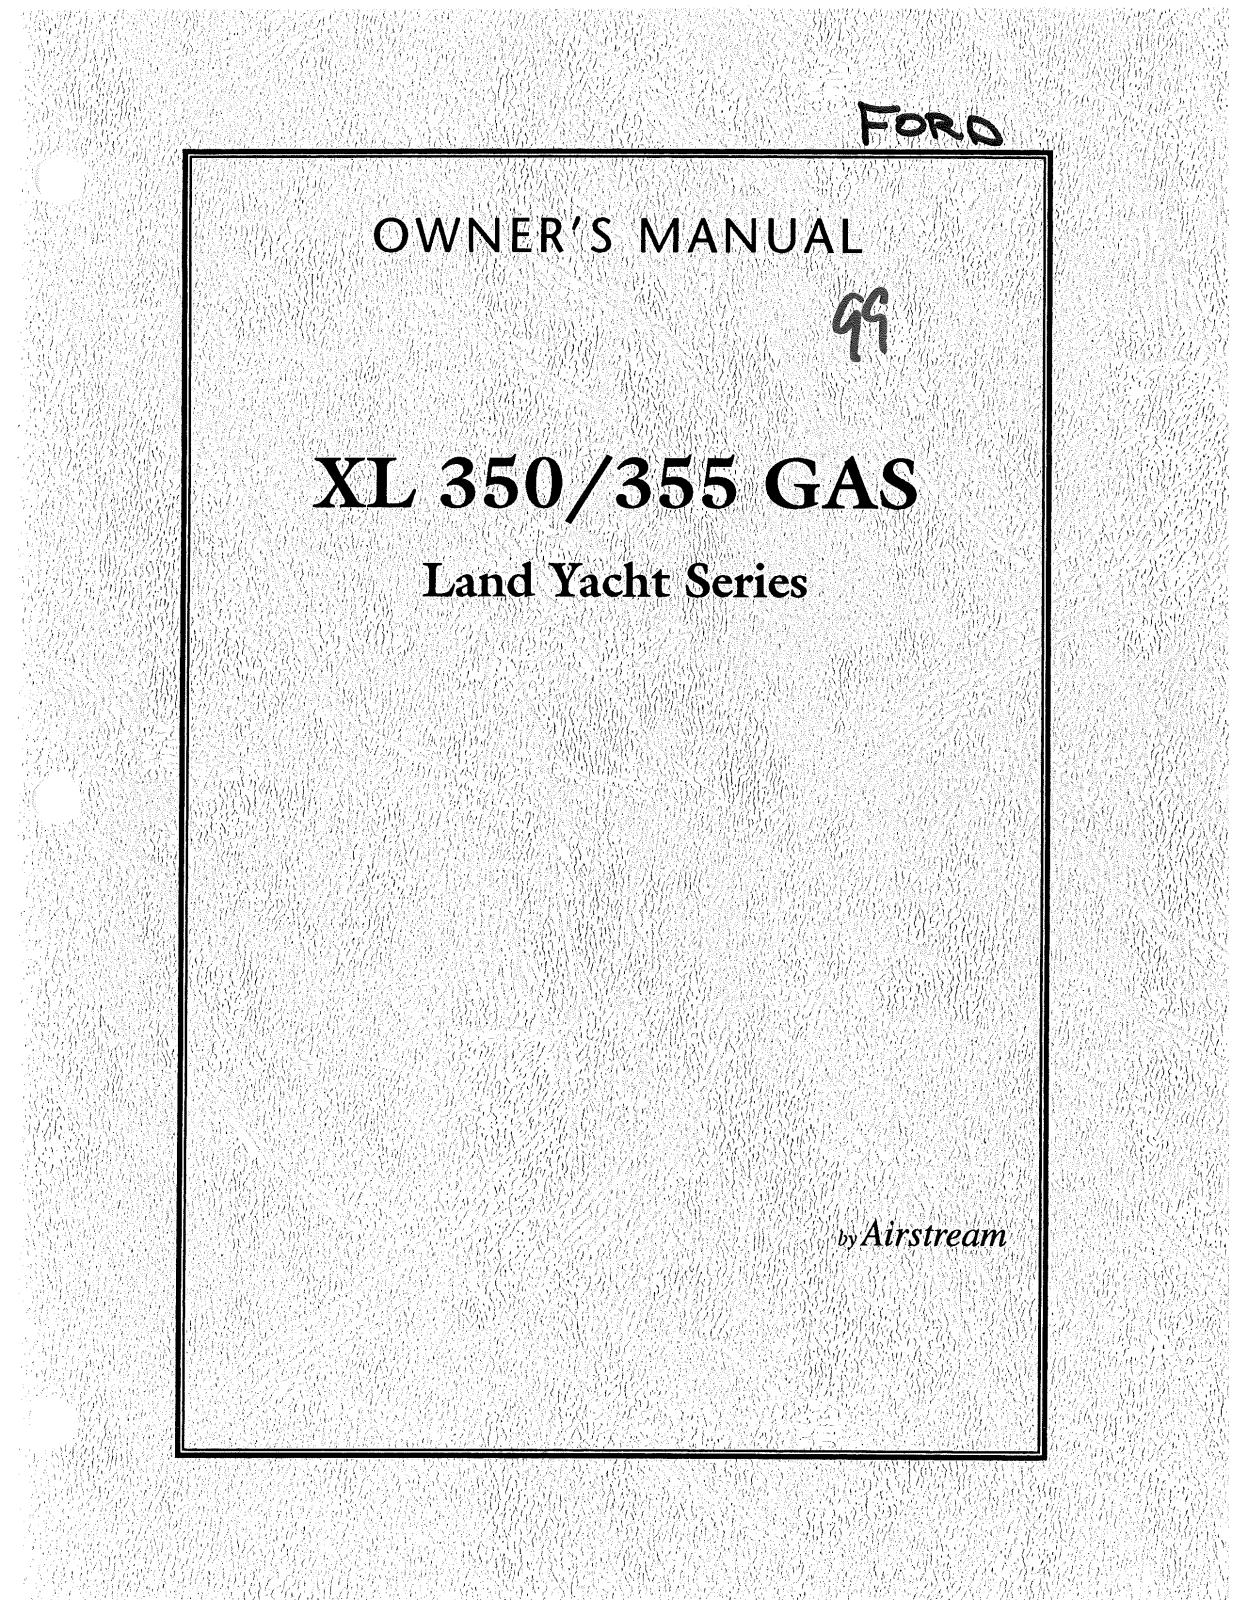 Airstream 350 355 Land Yacht XL Gas 1999 Owner's Manual